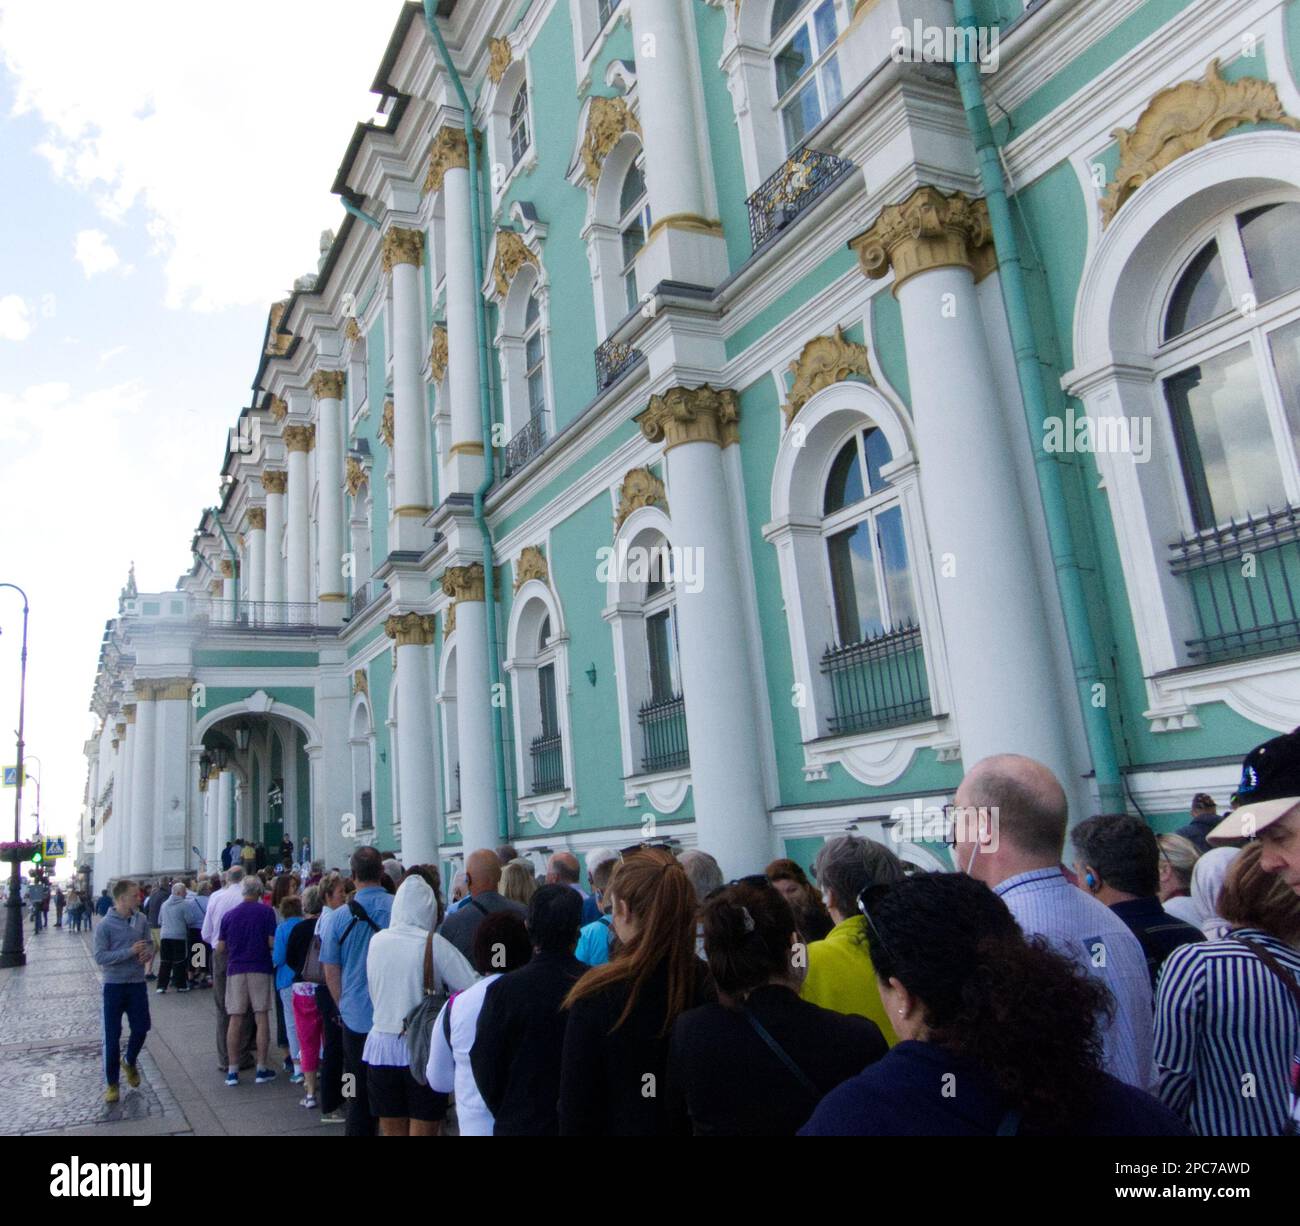 Visitors Queuing Outside the State Hermitage Museum, St Petersburg, Russia. Stock Photo